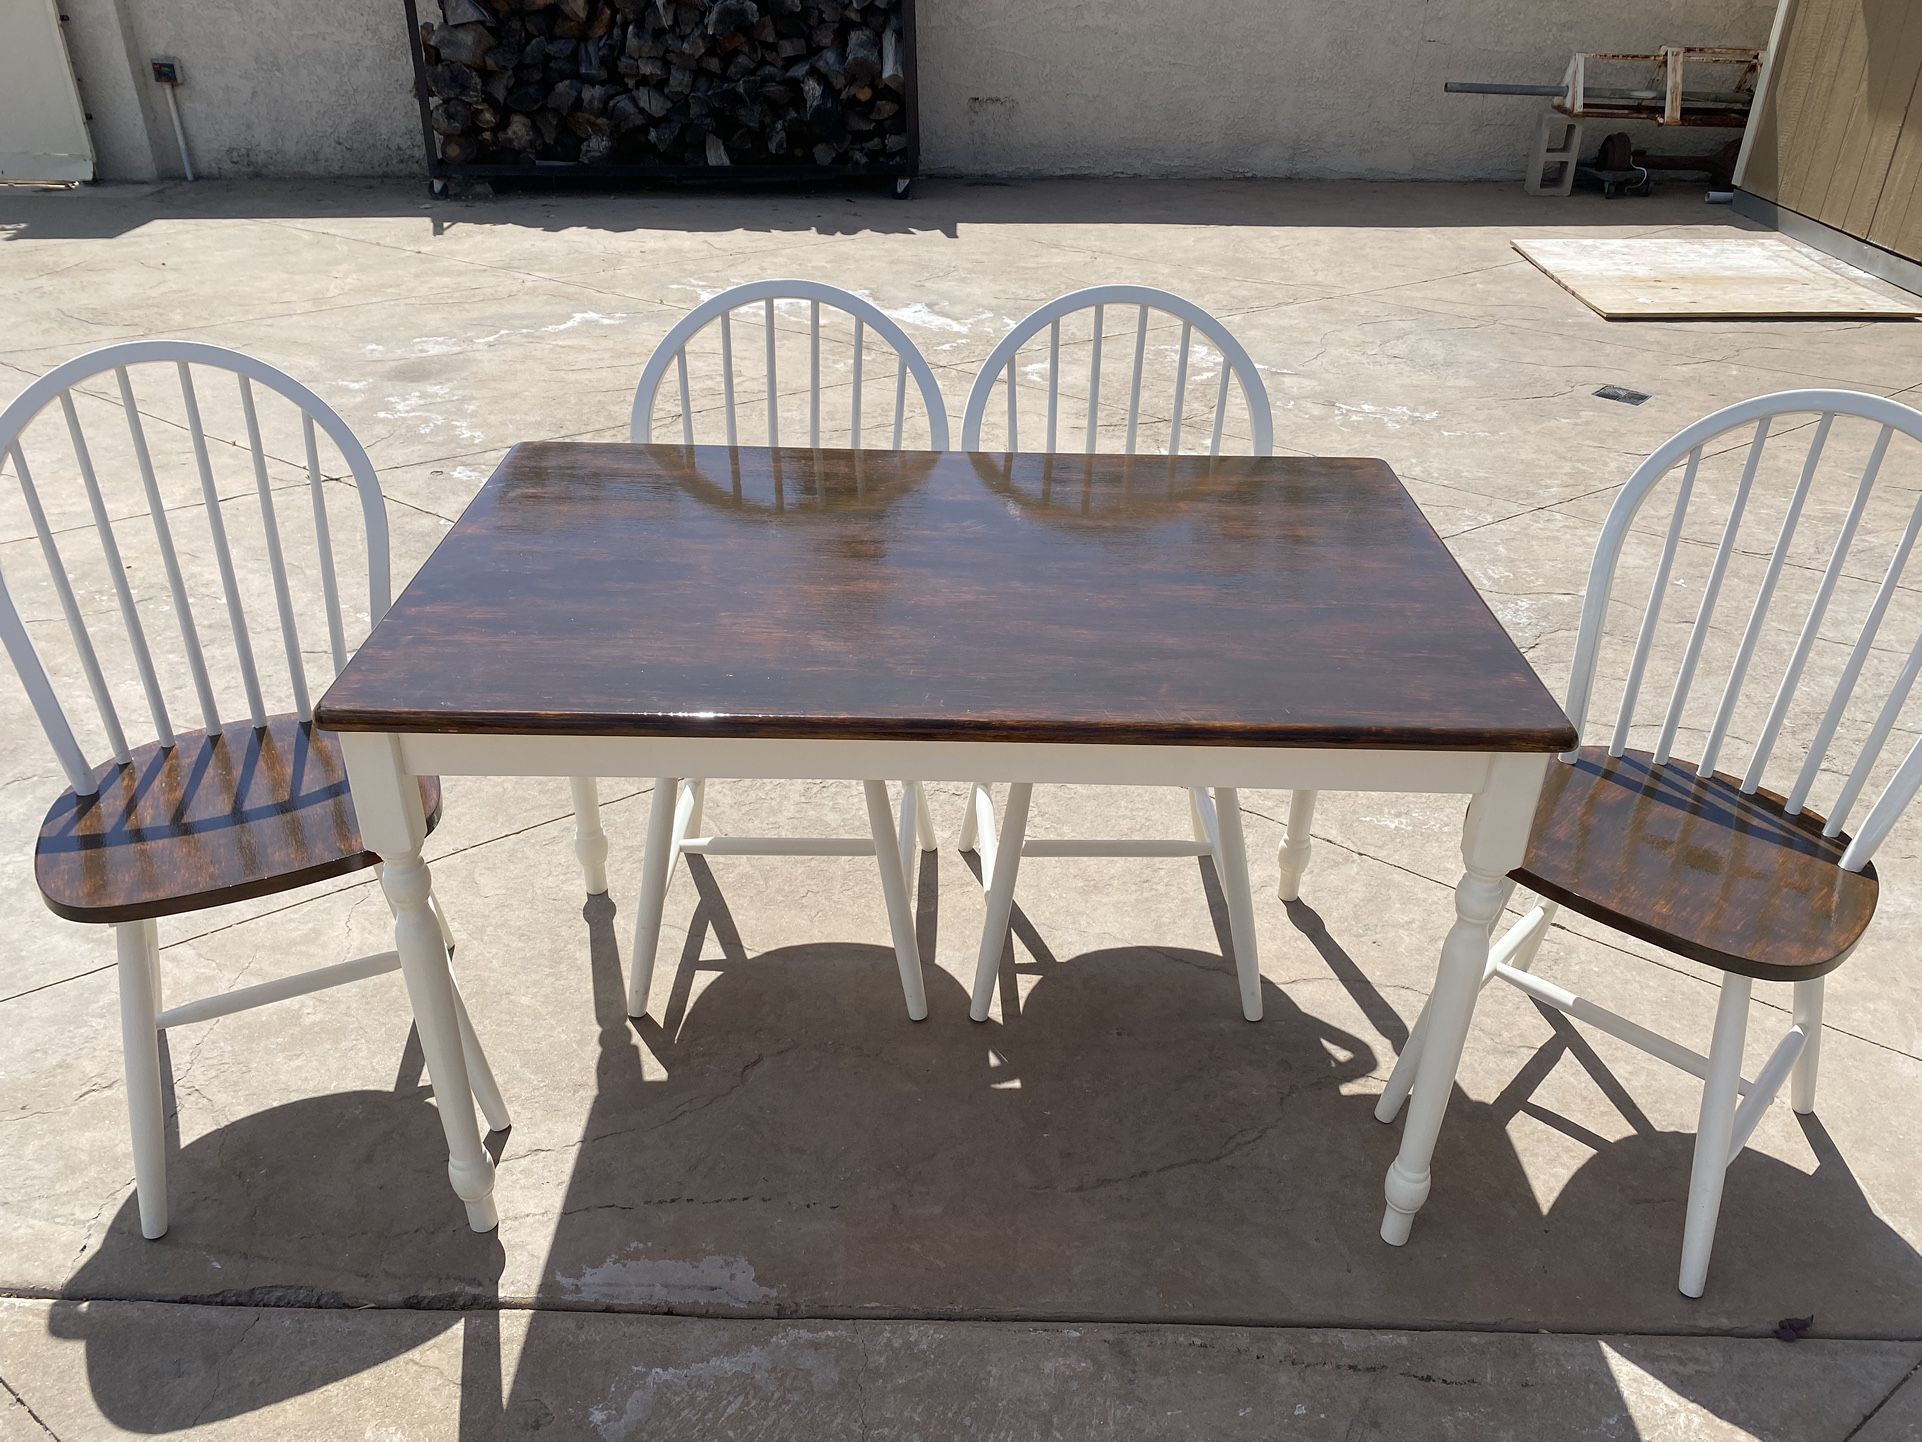 Refurbished Table And 4 Chairs